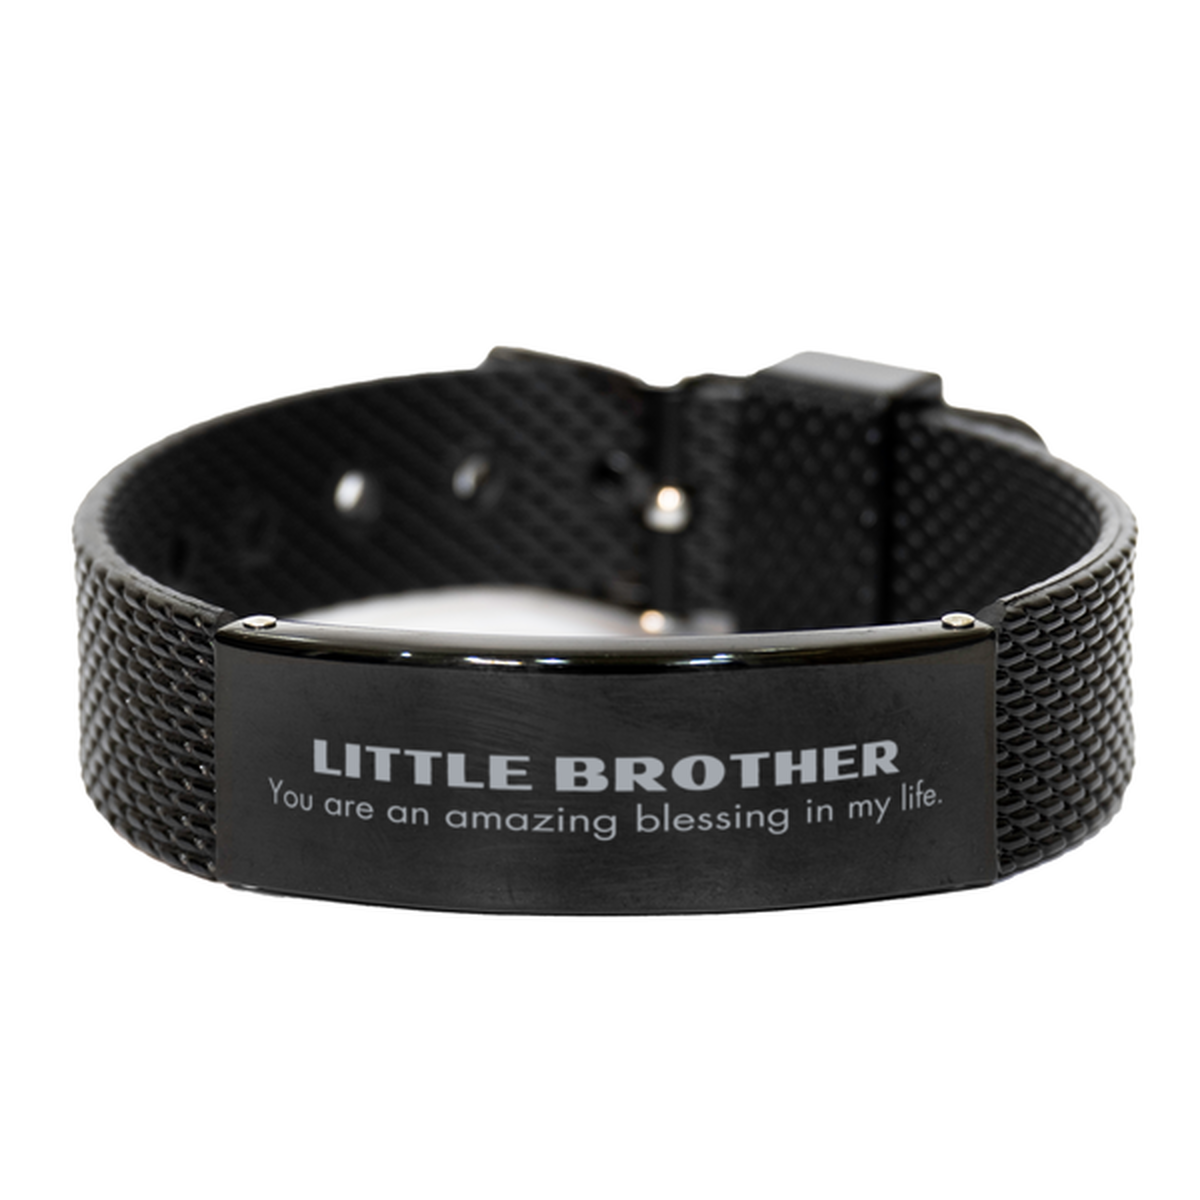 Little Brother Black Shark Mesh Bracelet, You are an amazing blessing in my life, Thank You Gifts For Little Brother, Inspirational Birthday Christmas Unique Gifts For Little Brother